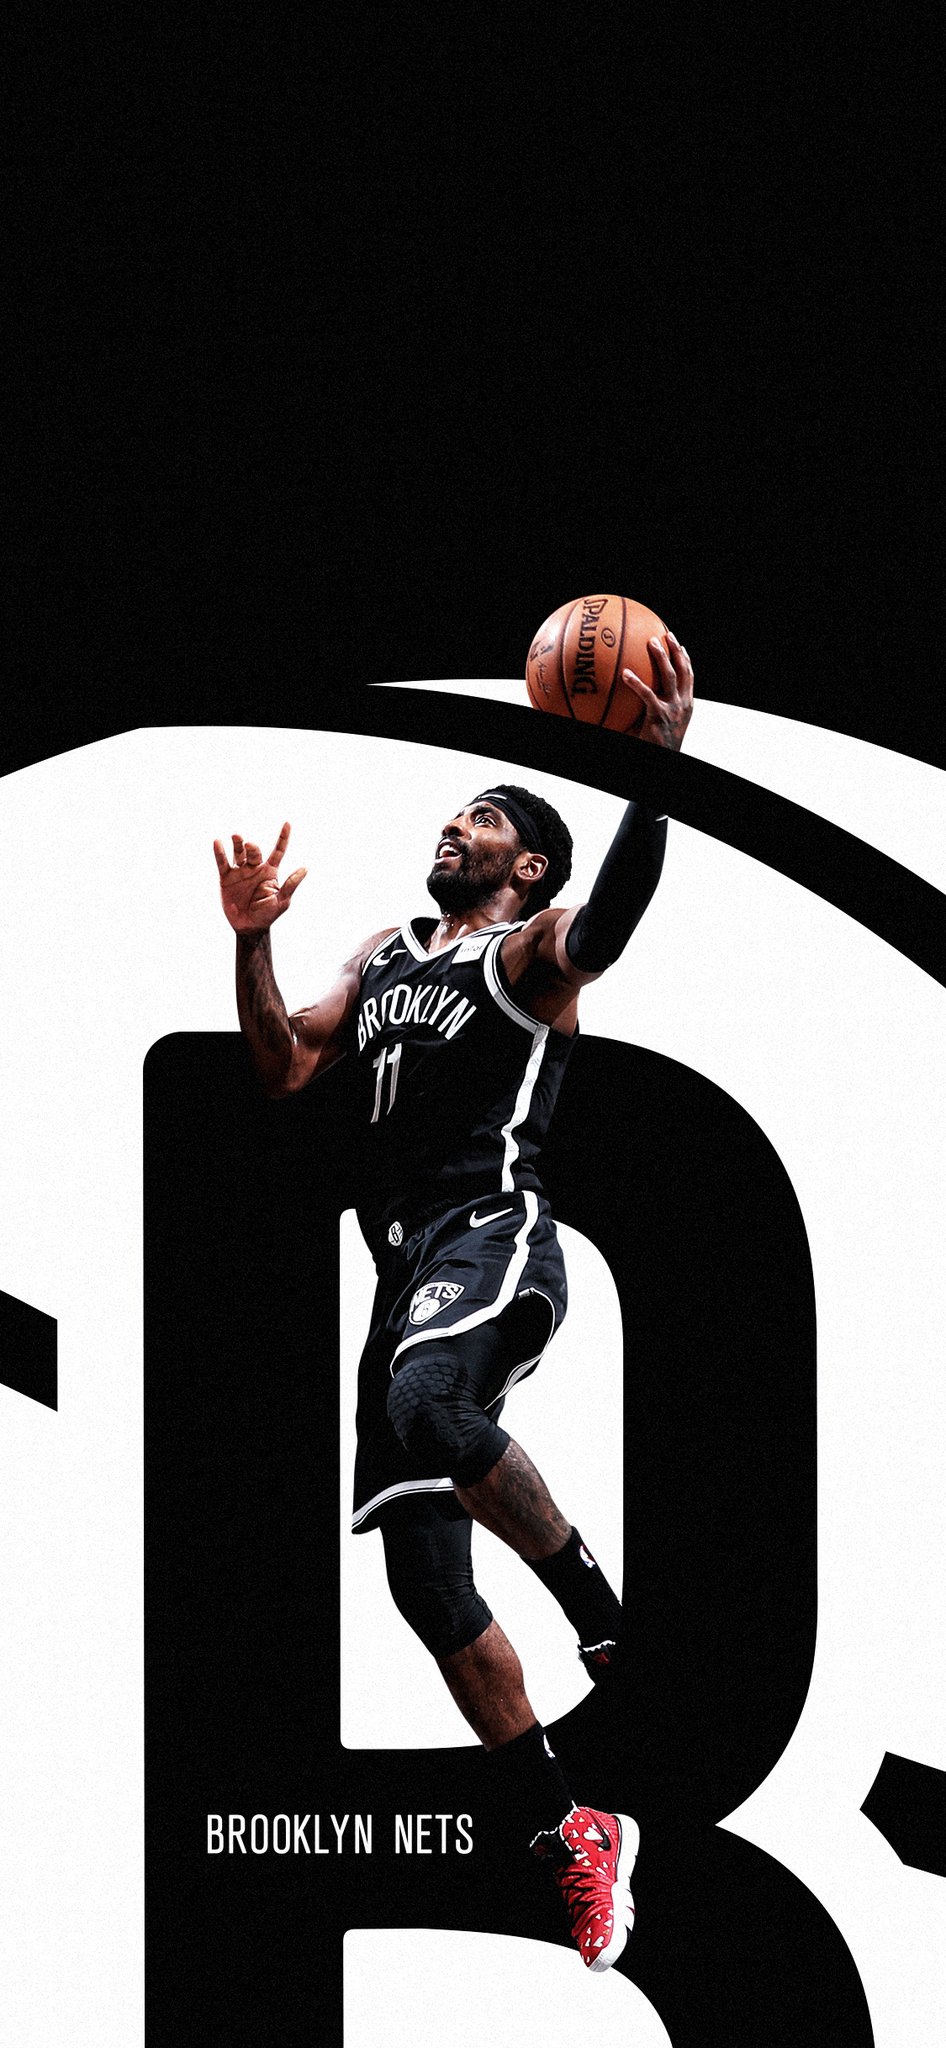 Brooklyn Nets on X: New batch of backgrounds! Keep your look on